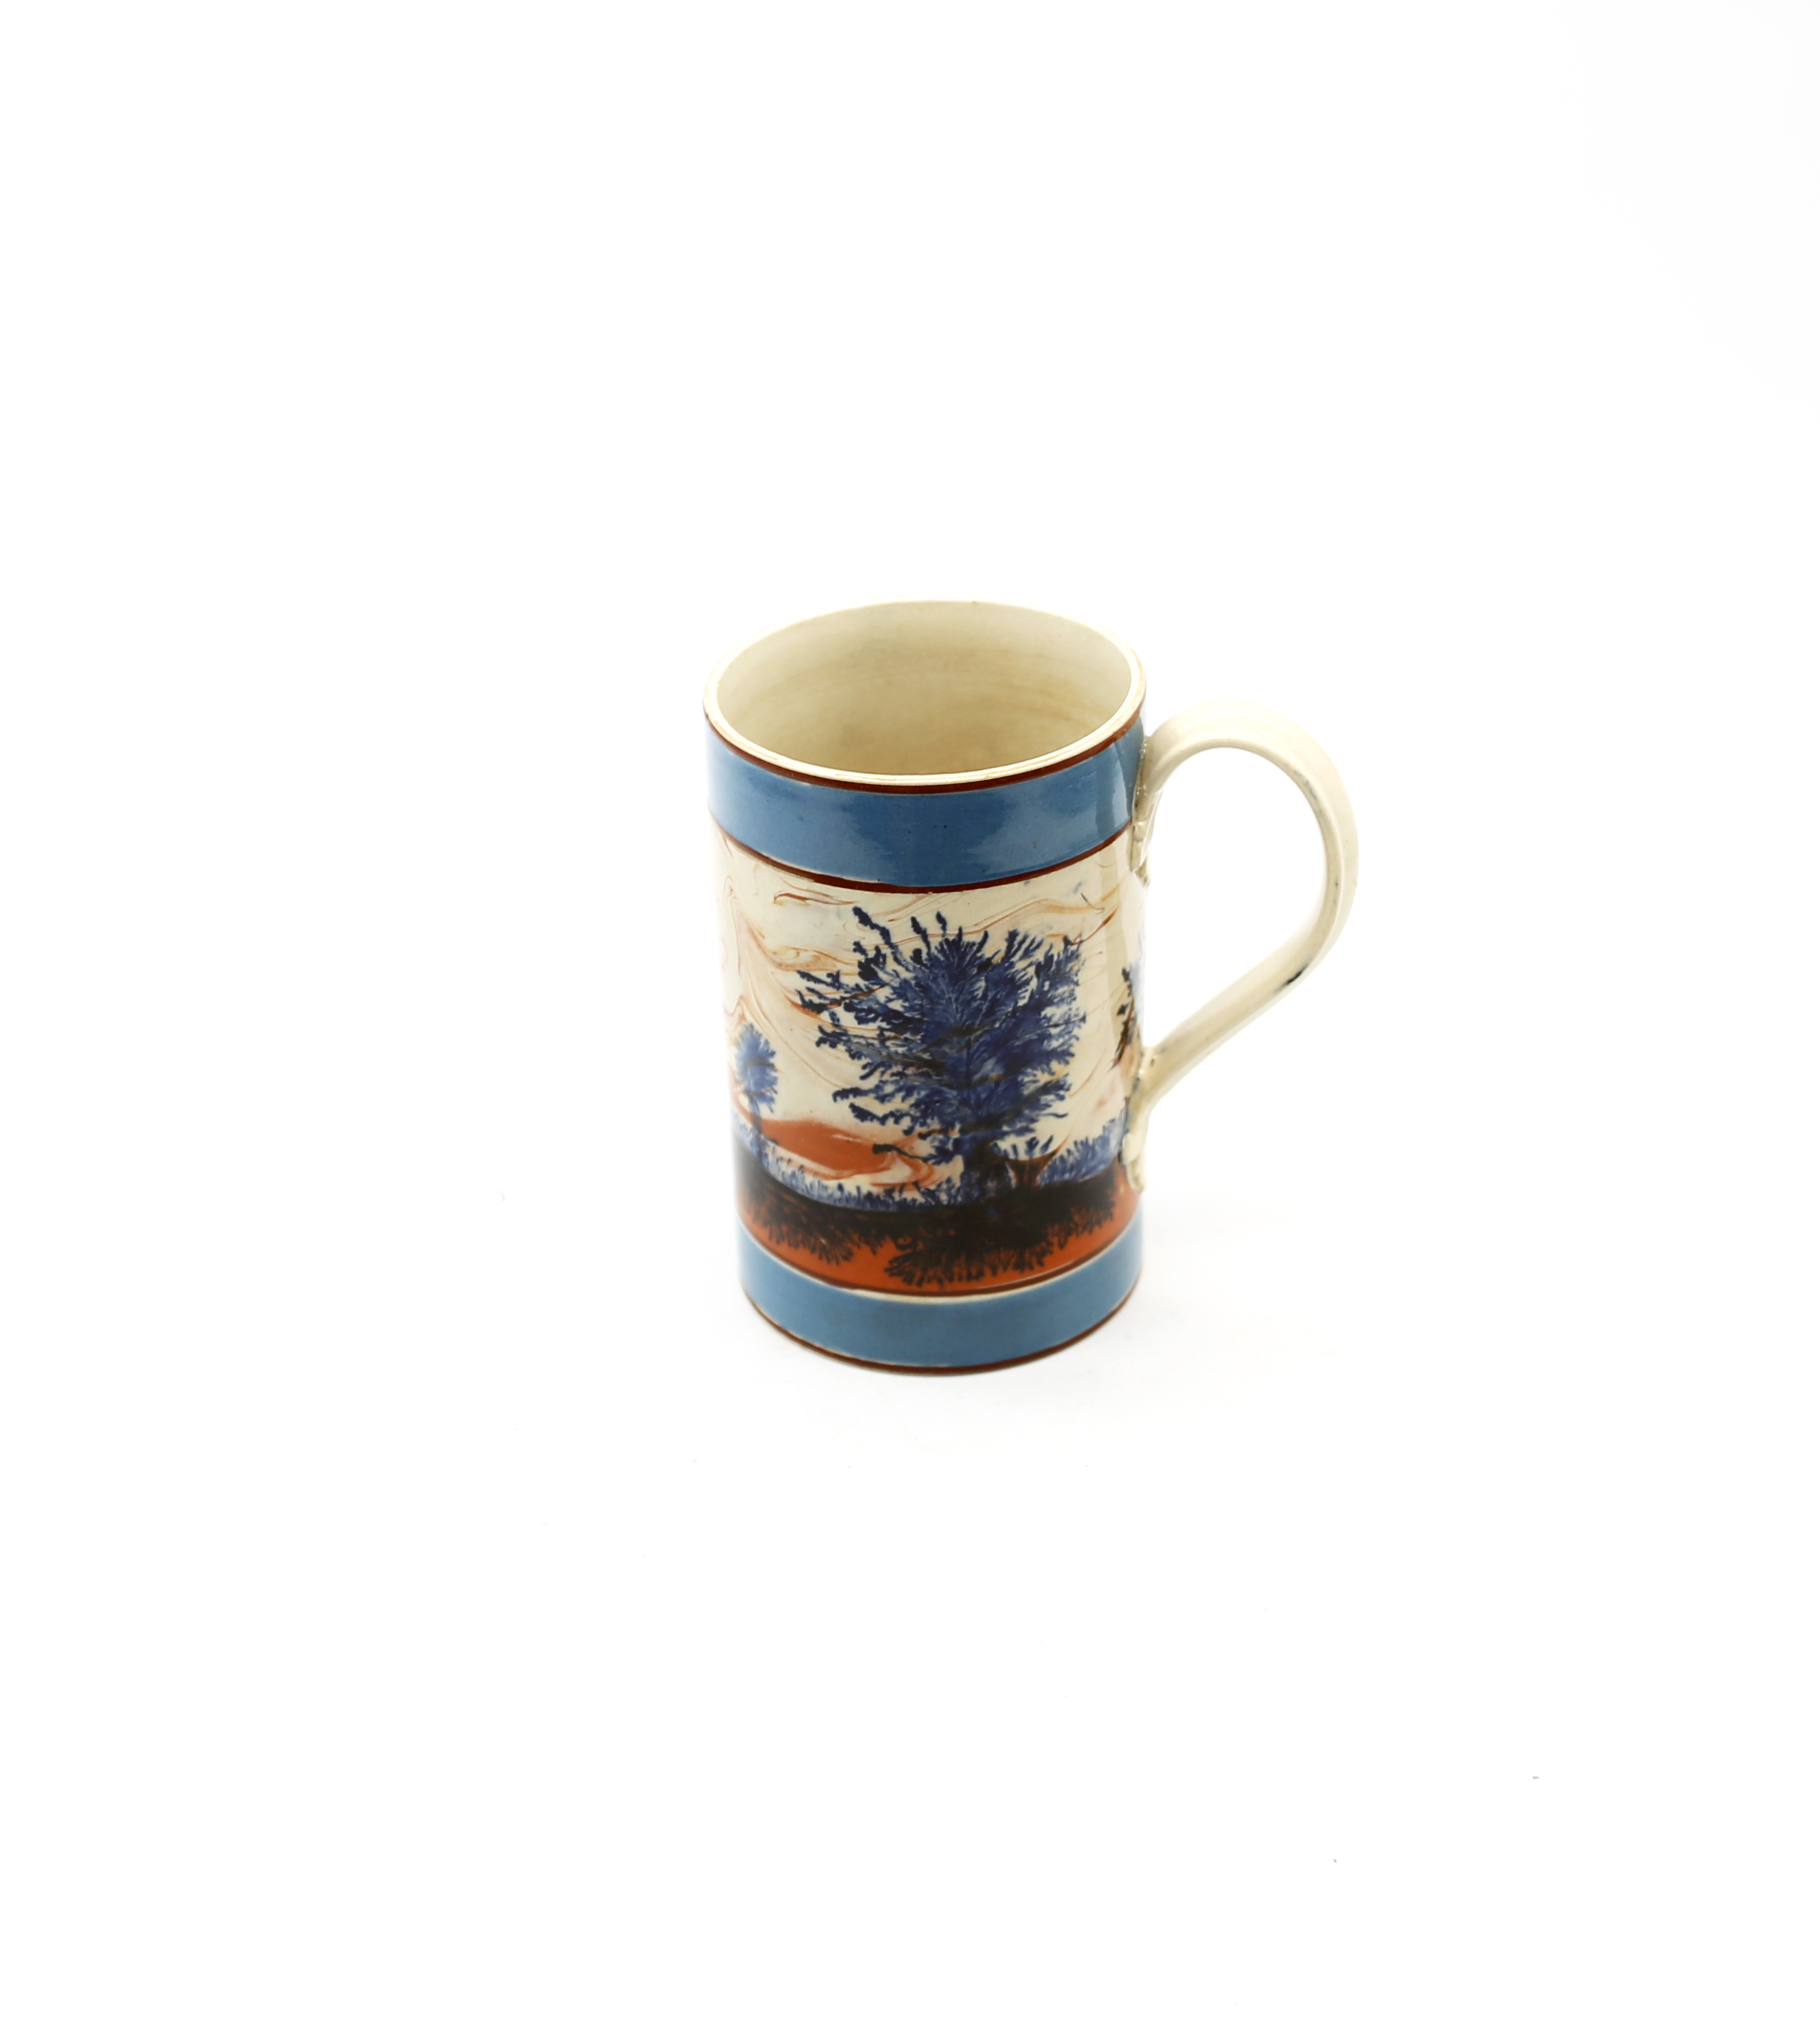 A mocha cylindrical mug, with blue feathered blue trees and a tan and black landscape and wide